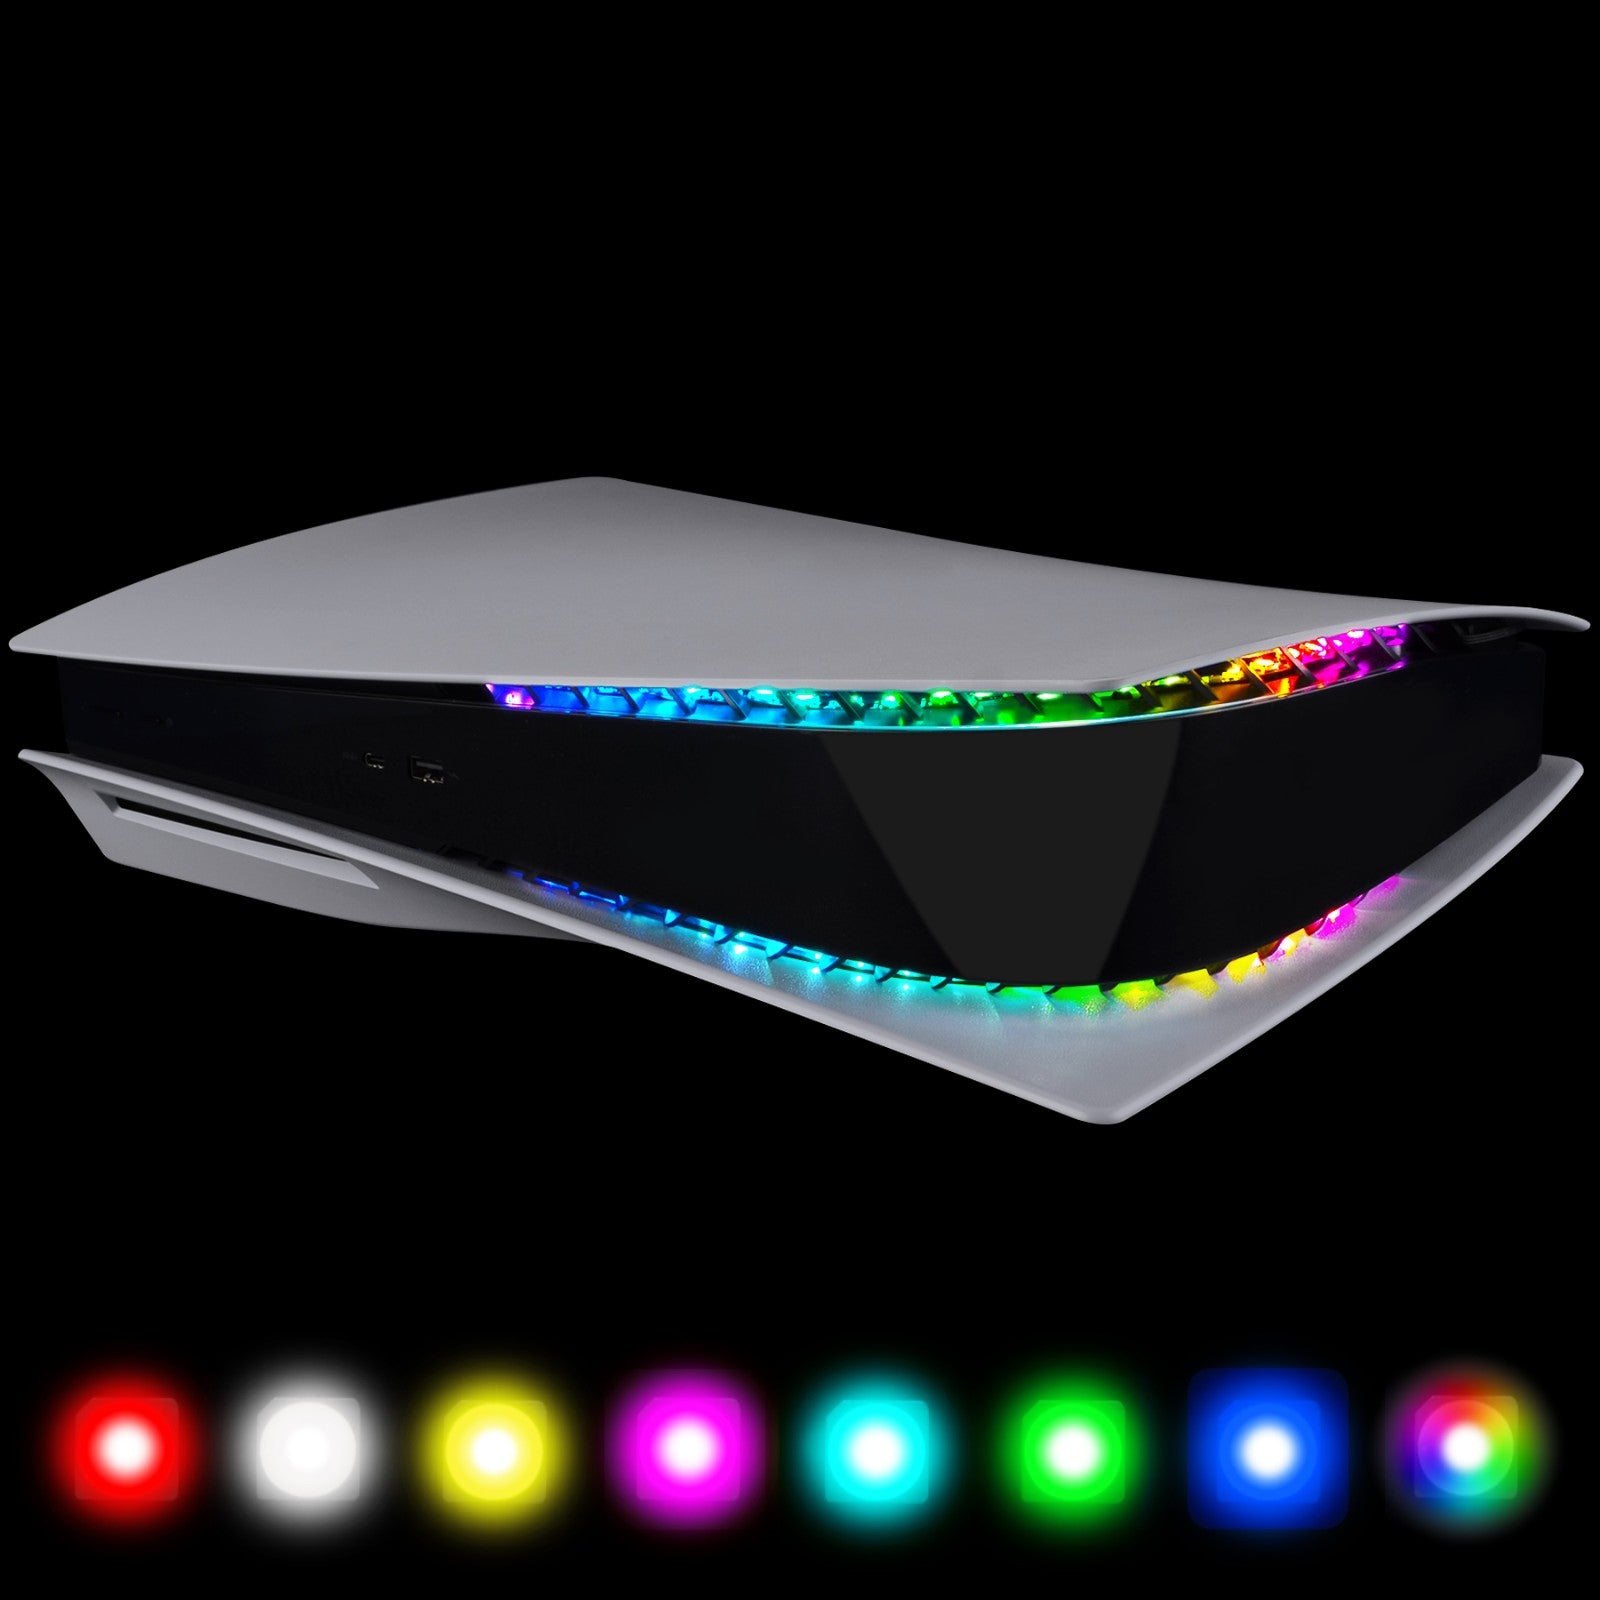 RGB LED Light Strip for PS5 Console, 7 Colors 29 Effects DIY